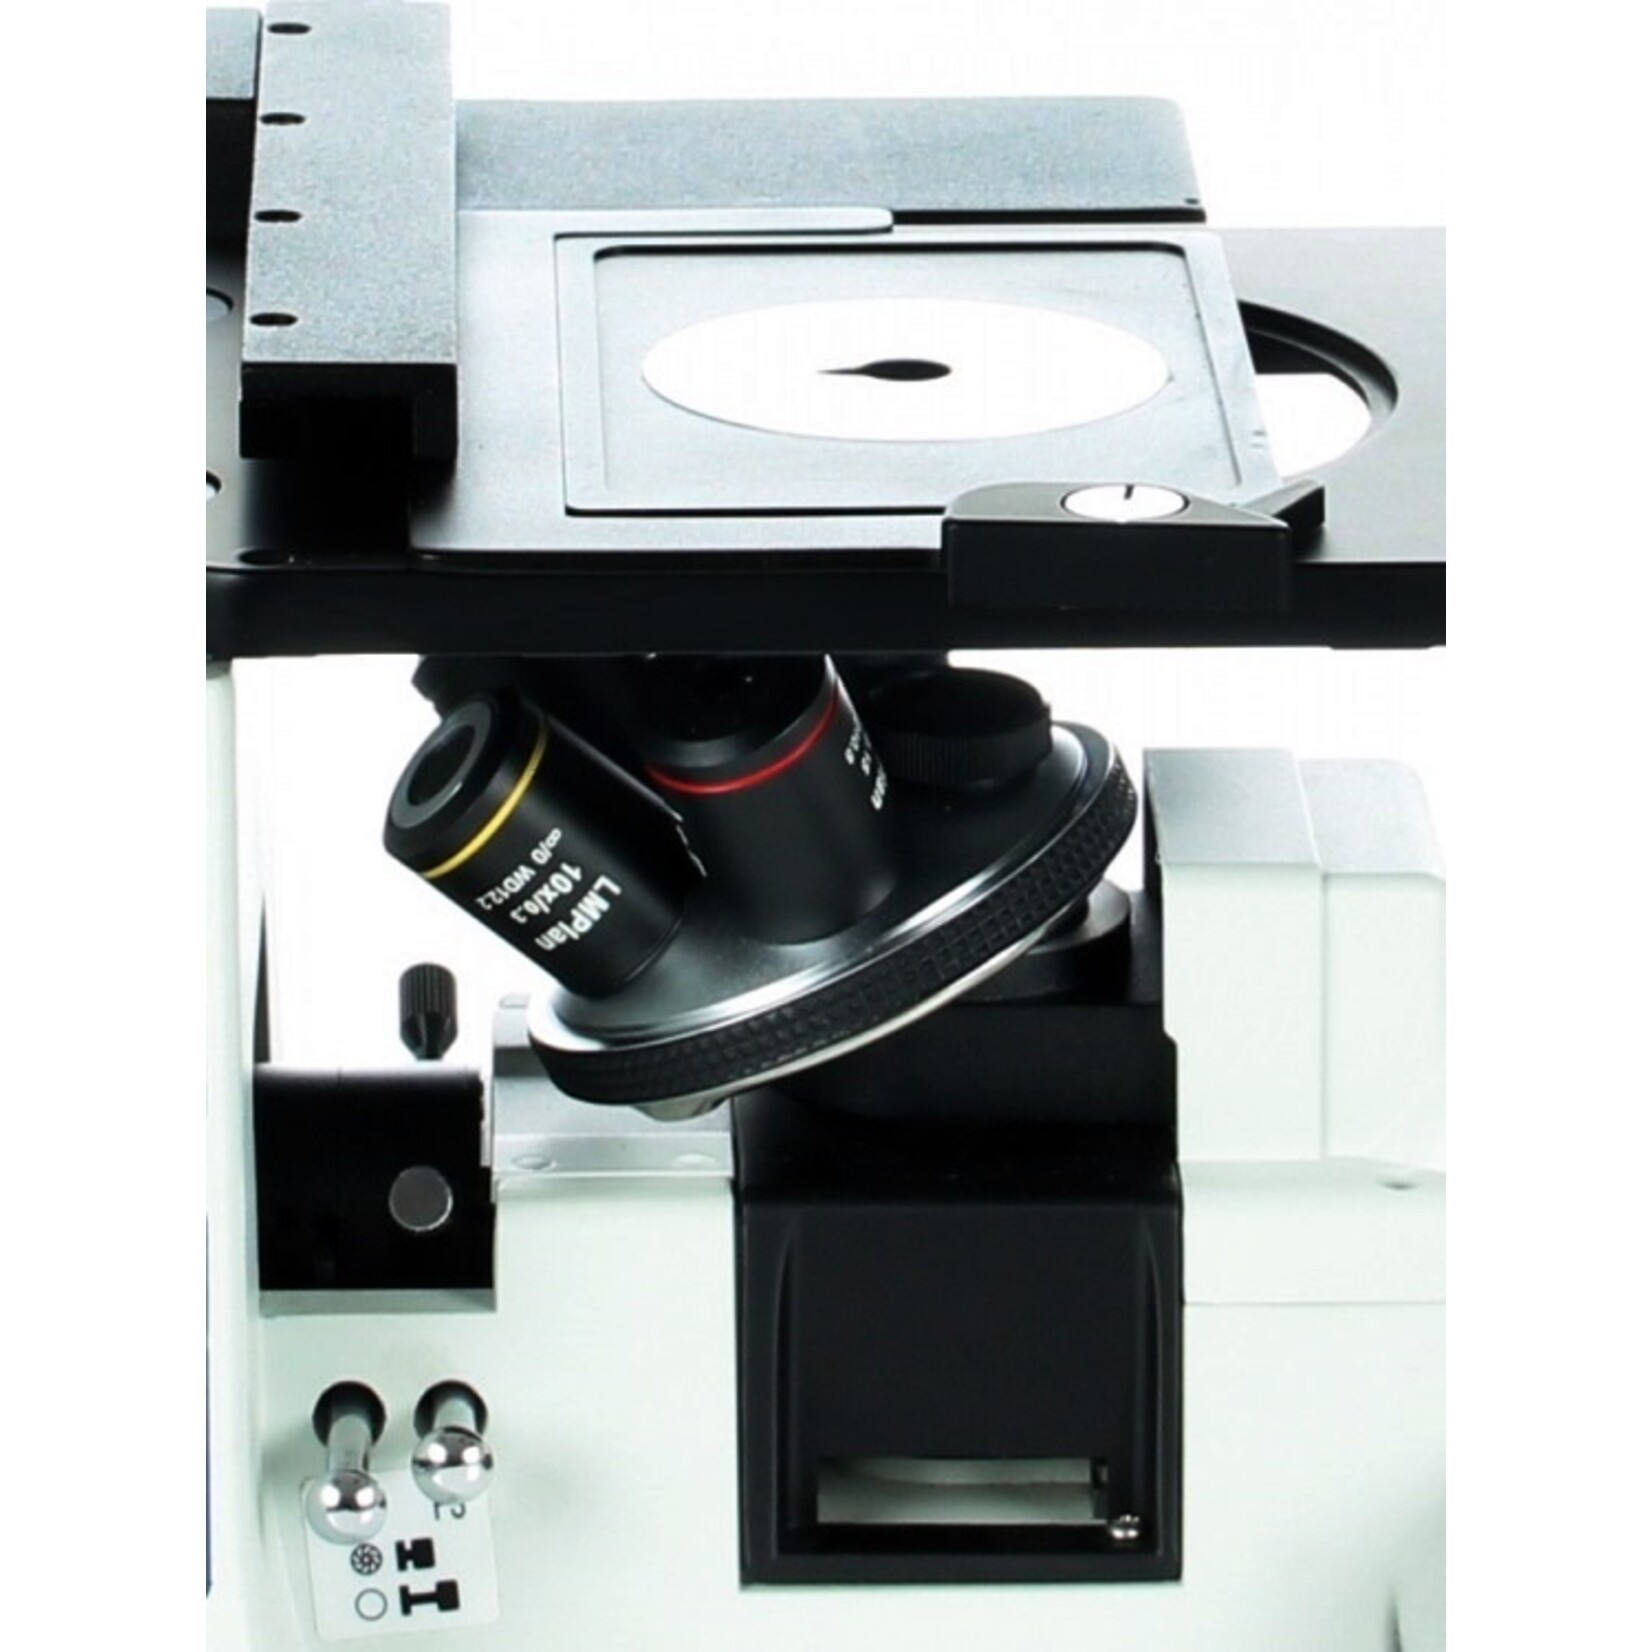 Oxion Inverso Inverted Metallurgical Microscope